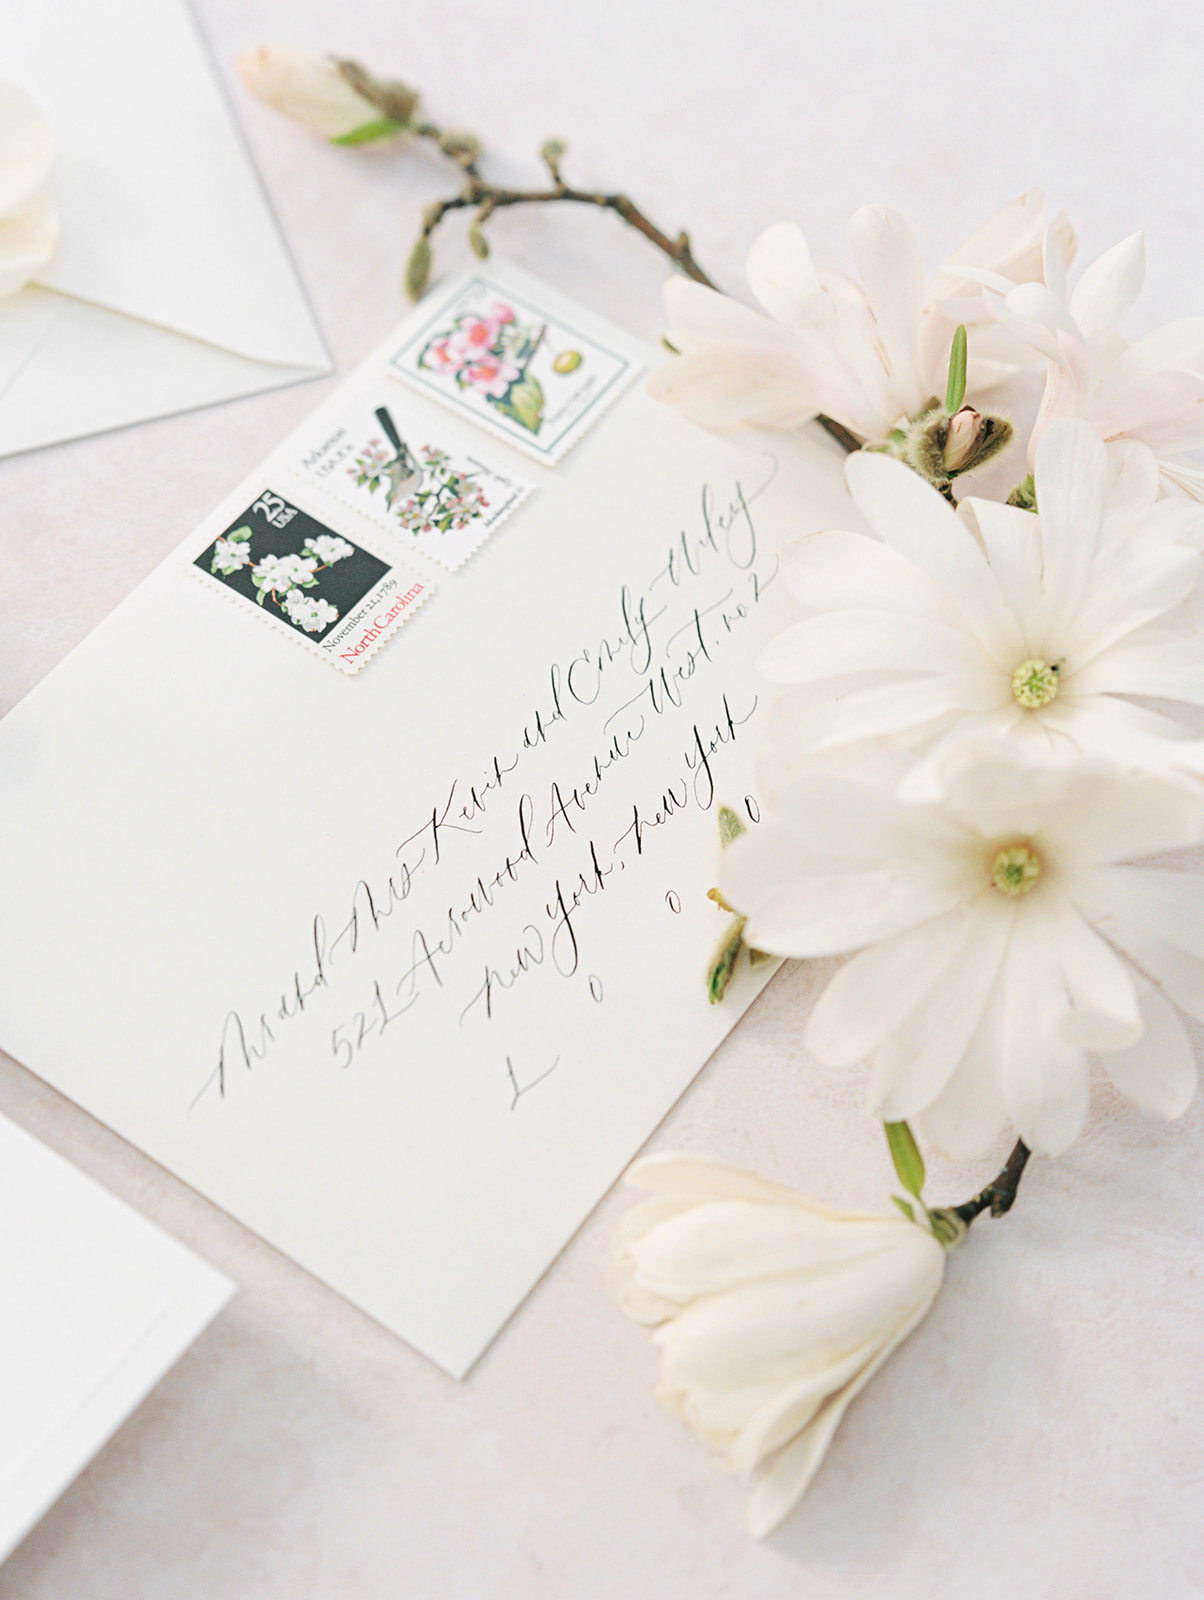 Wedding stationery with blooming branches